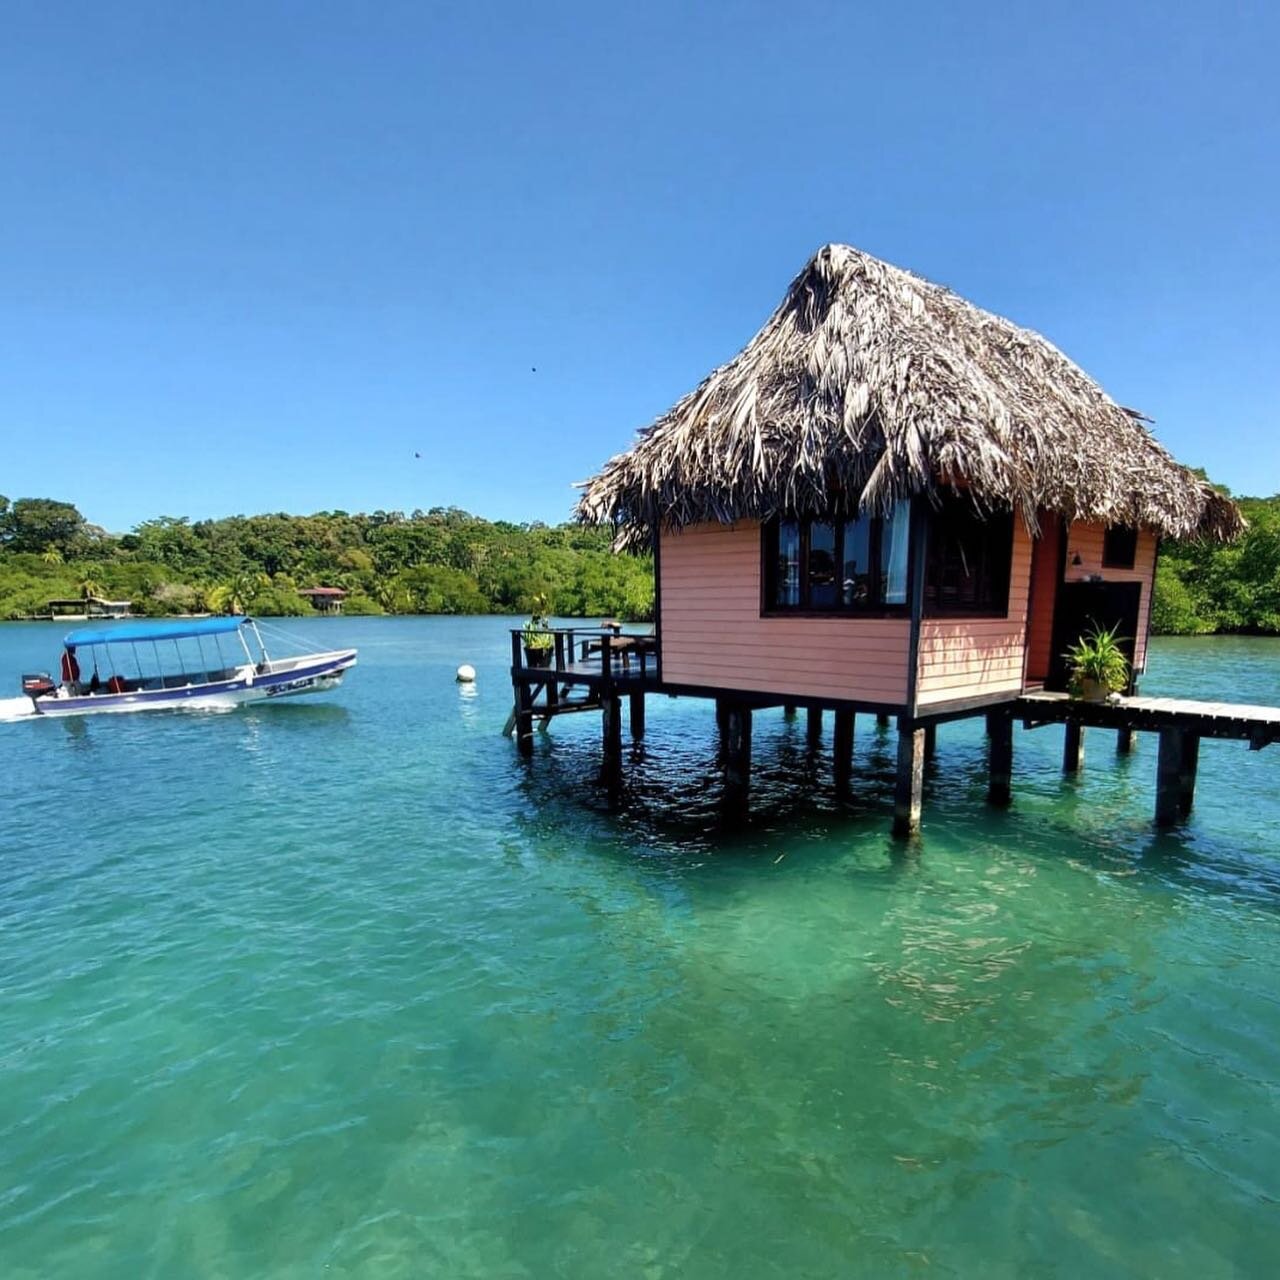 Why Bocas Del Toro, Panam&aacute; is heaven when you want vacation without crowds. Water bungalows, boat taxis, restaurants with a view, lush jungles and adventure galore. 

The area is made up of three main islands. Bocas Town is on Isla Colon. This